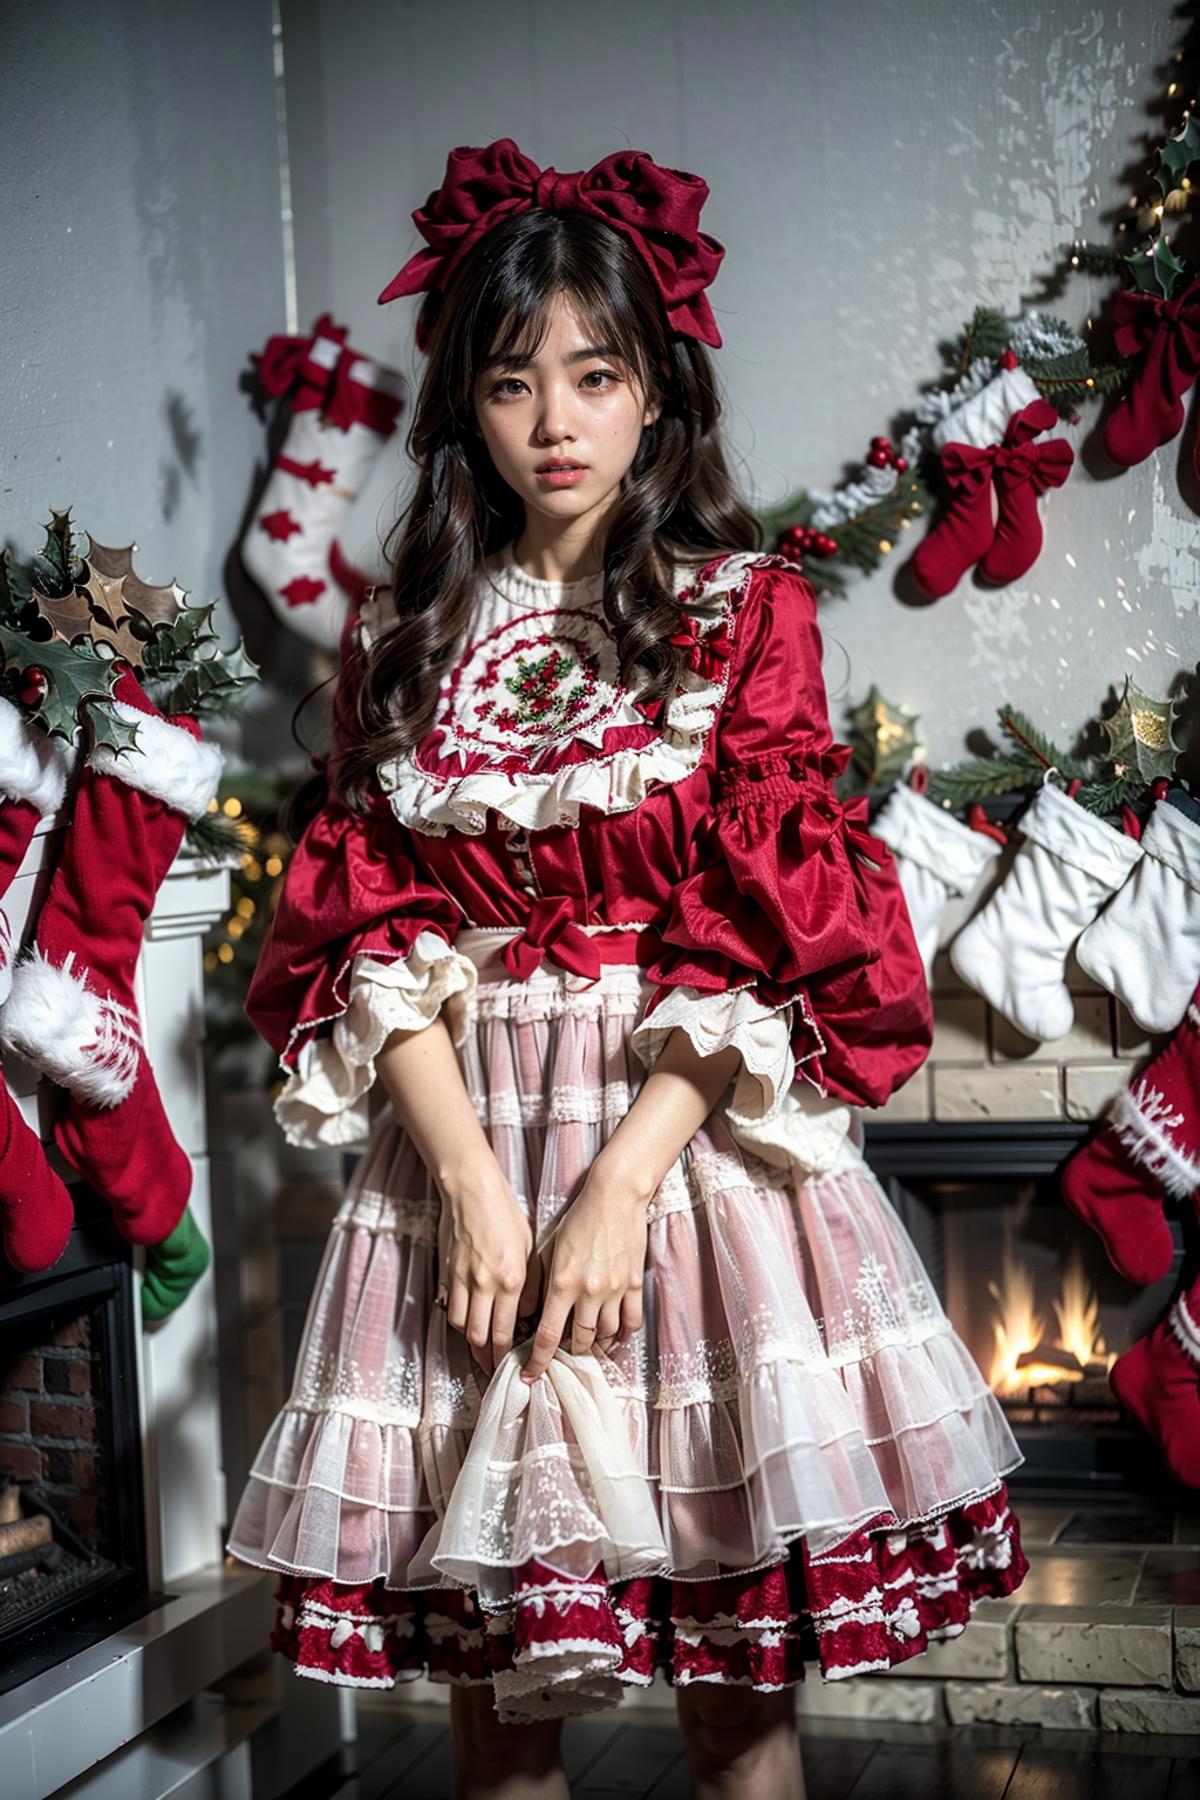 [Realistic] Christmas dress | 圣诞小裙几 image by feetie